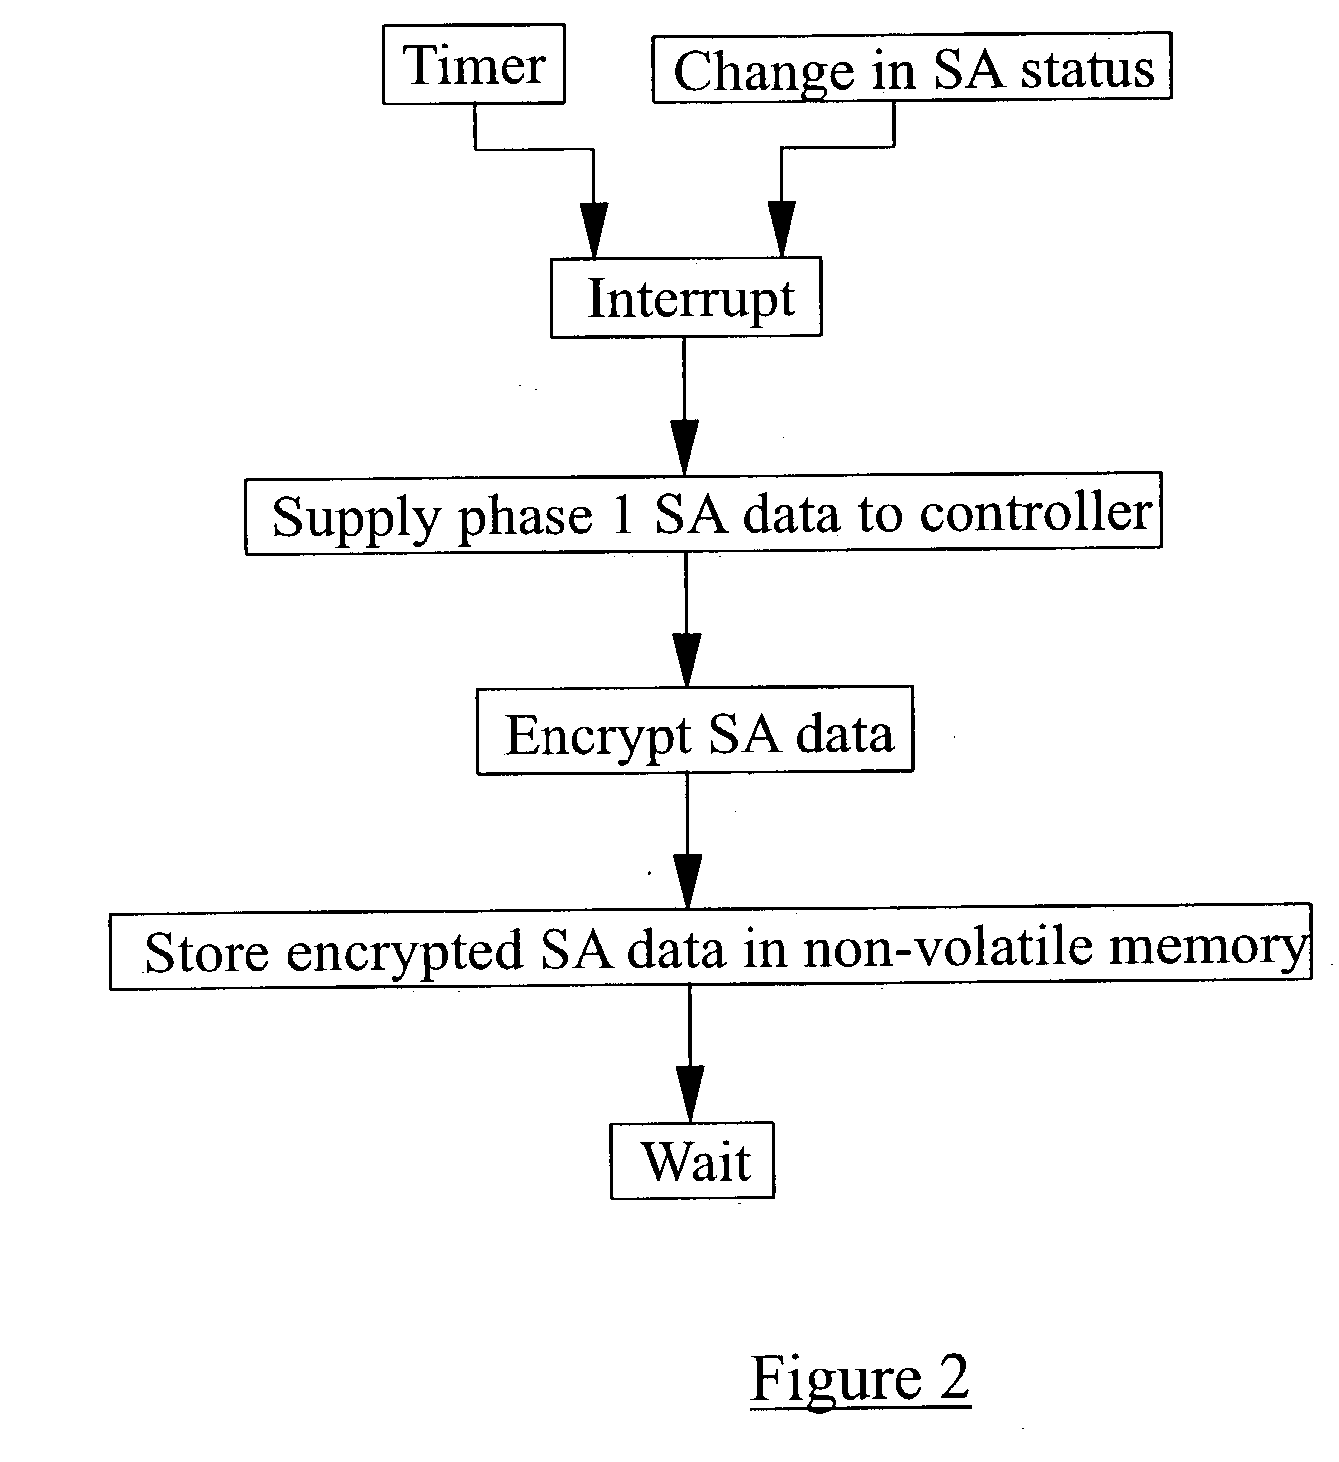 Method and apparatus for recovering from the failure or reset of an IKE node